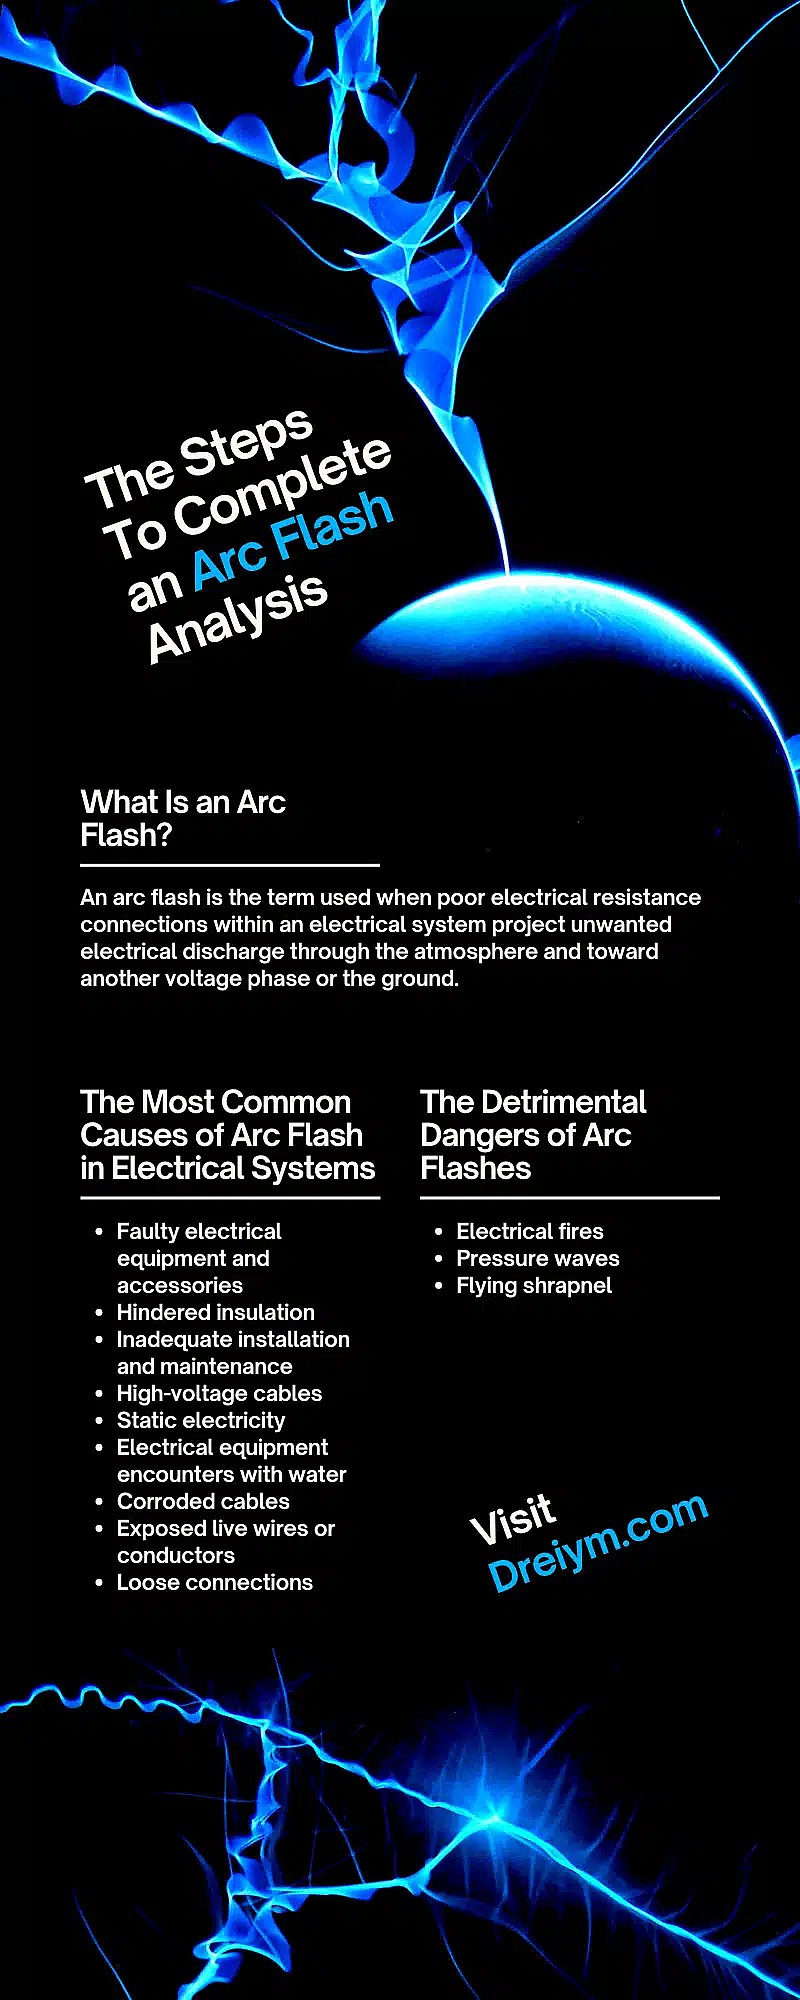 The Steps To Complete an Arc Flash Analysis